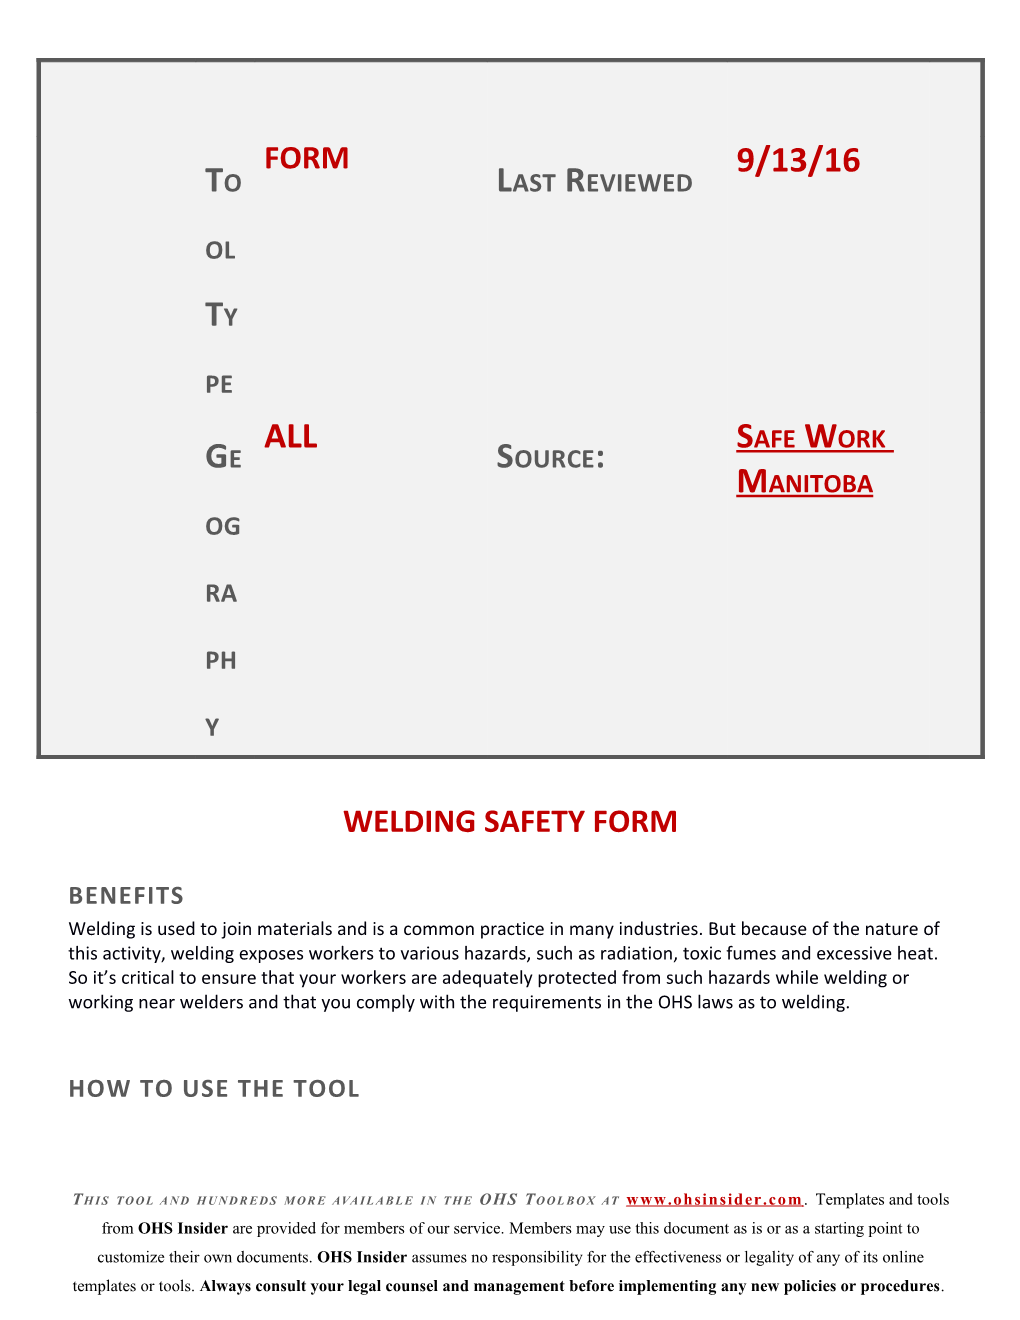 Welding Safety Form